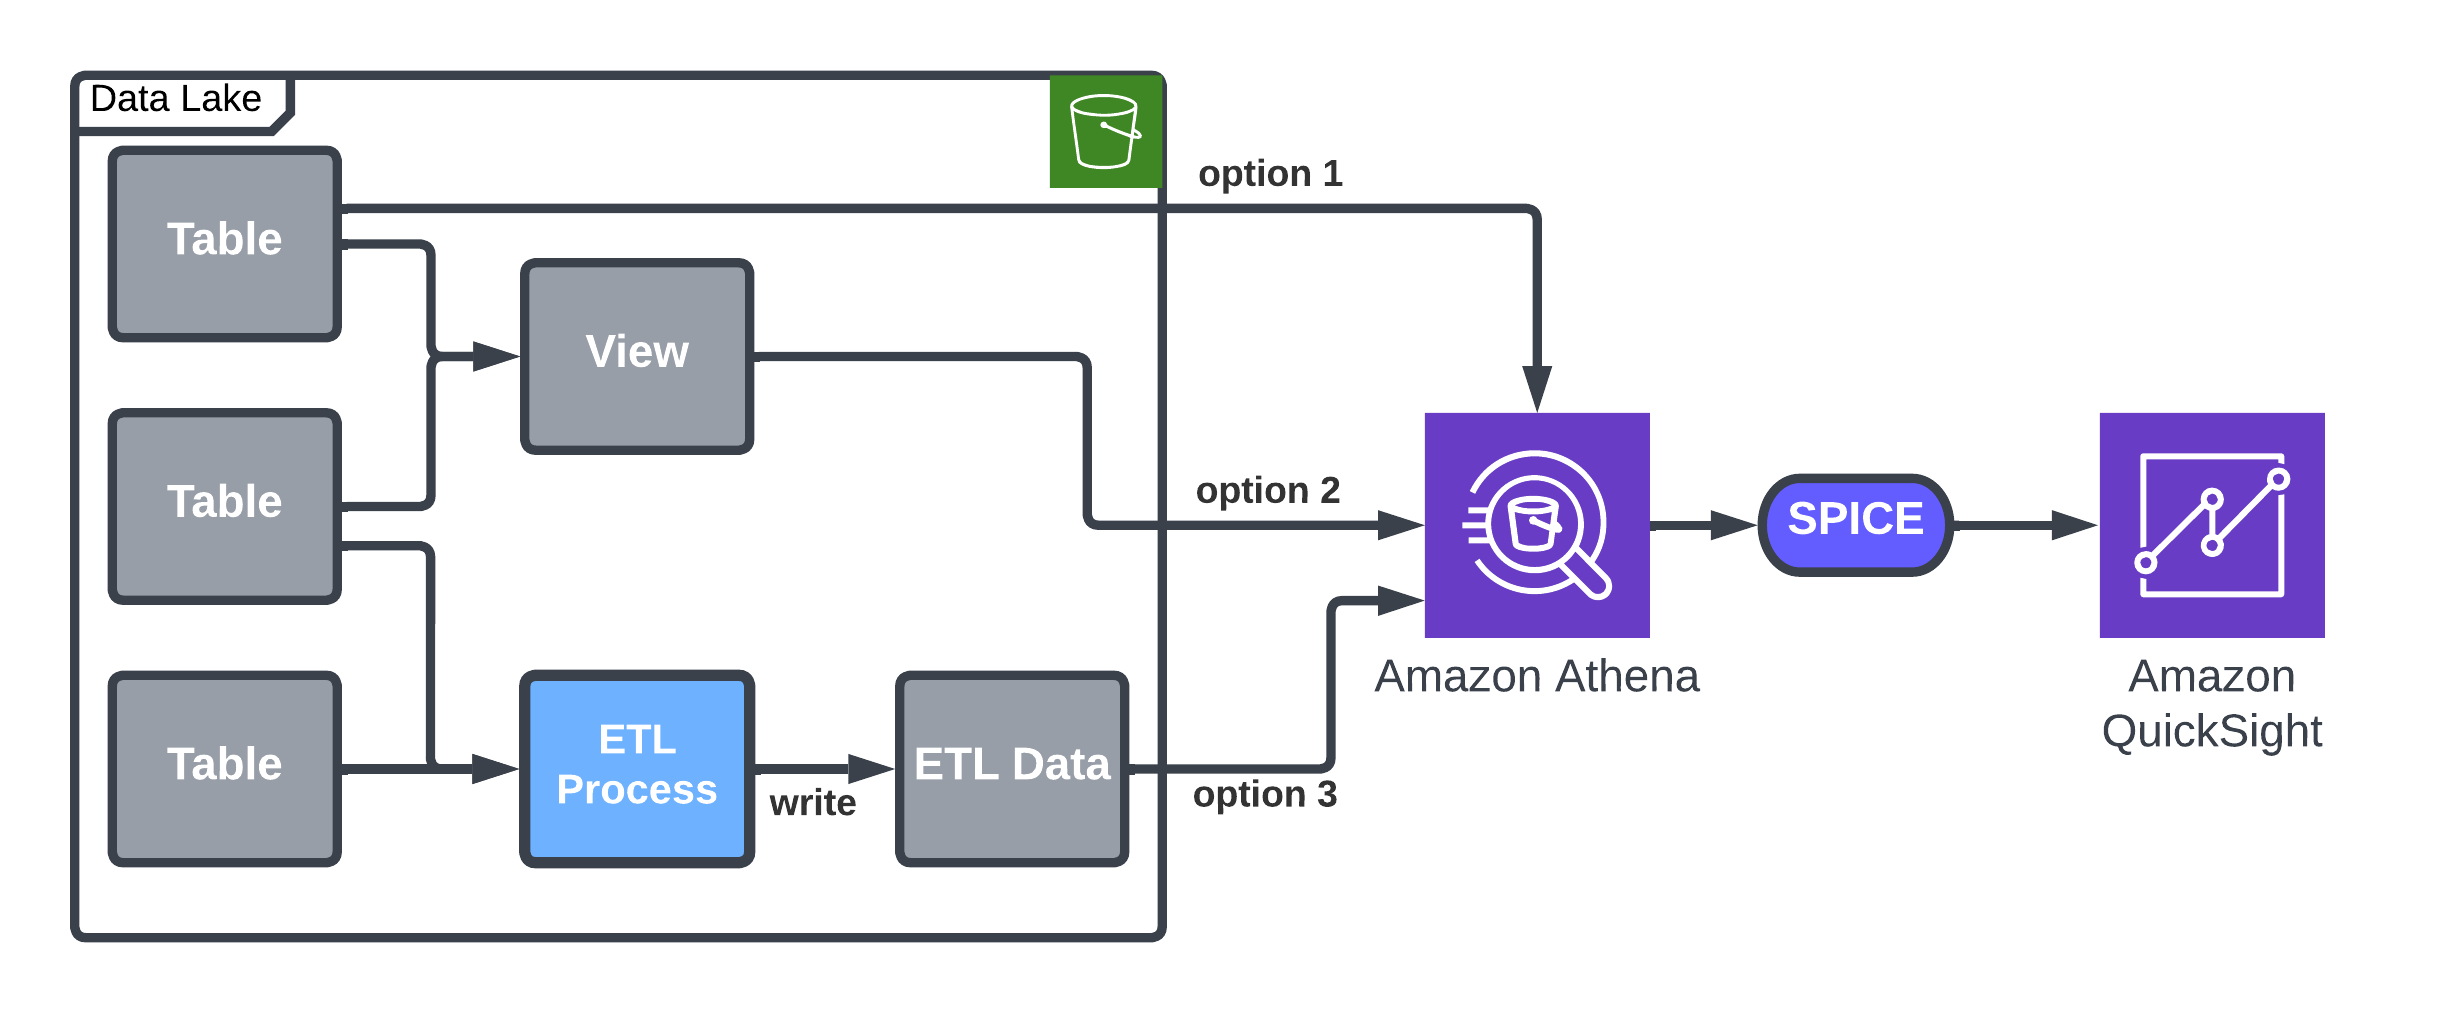 Architecture diagram details the options for loading data by Athena into SPICE